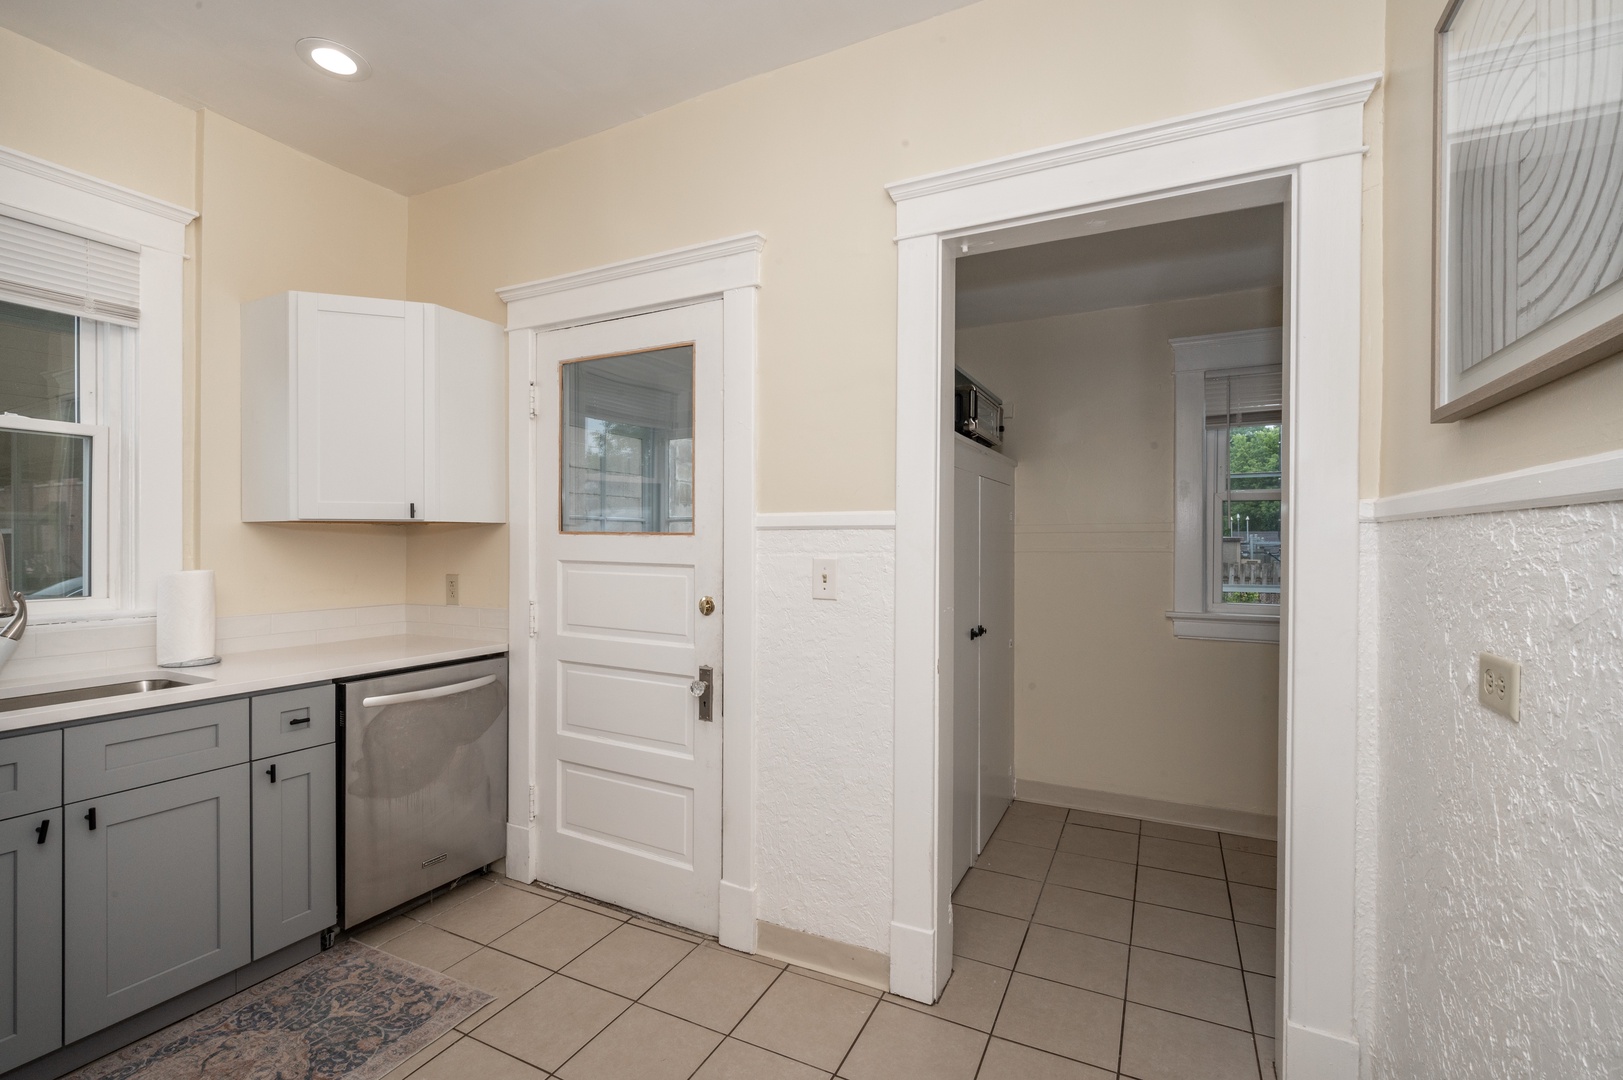 Guests can find additional storage and space off the kitchen